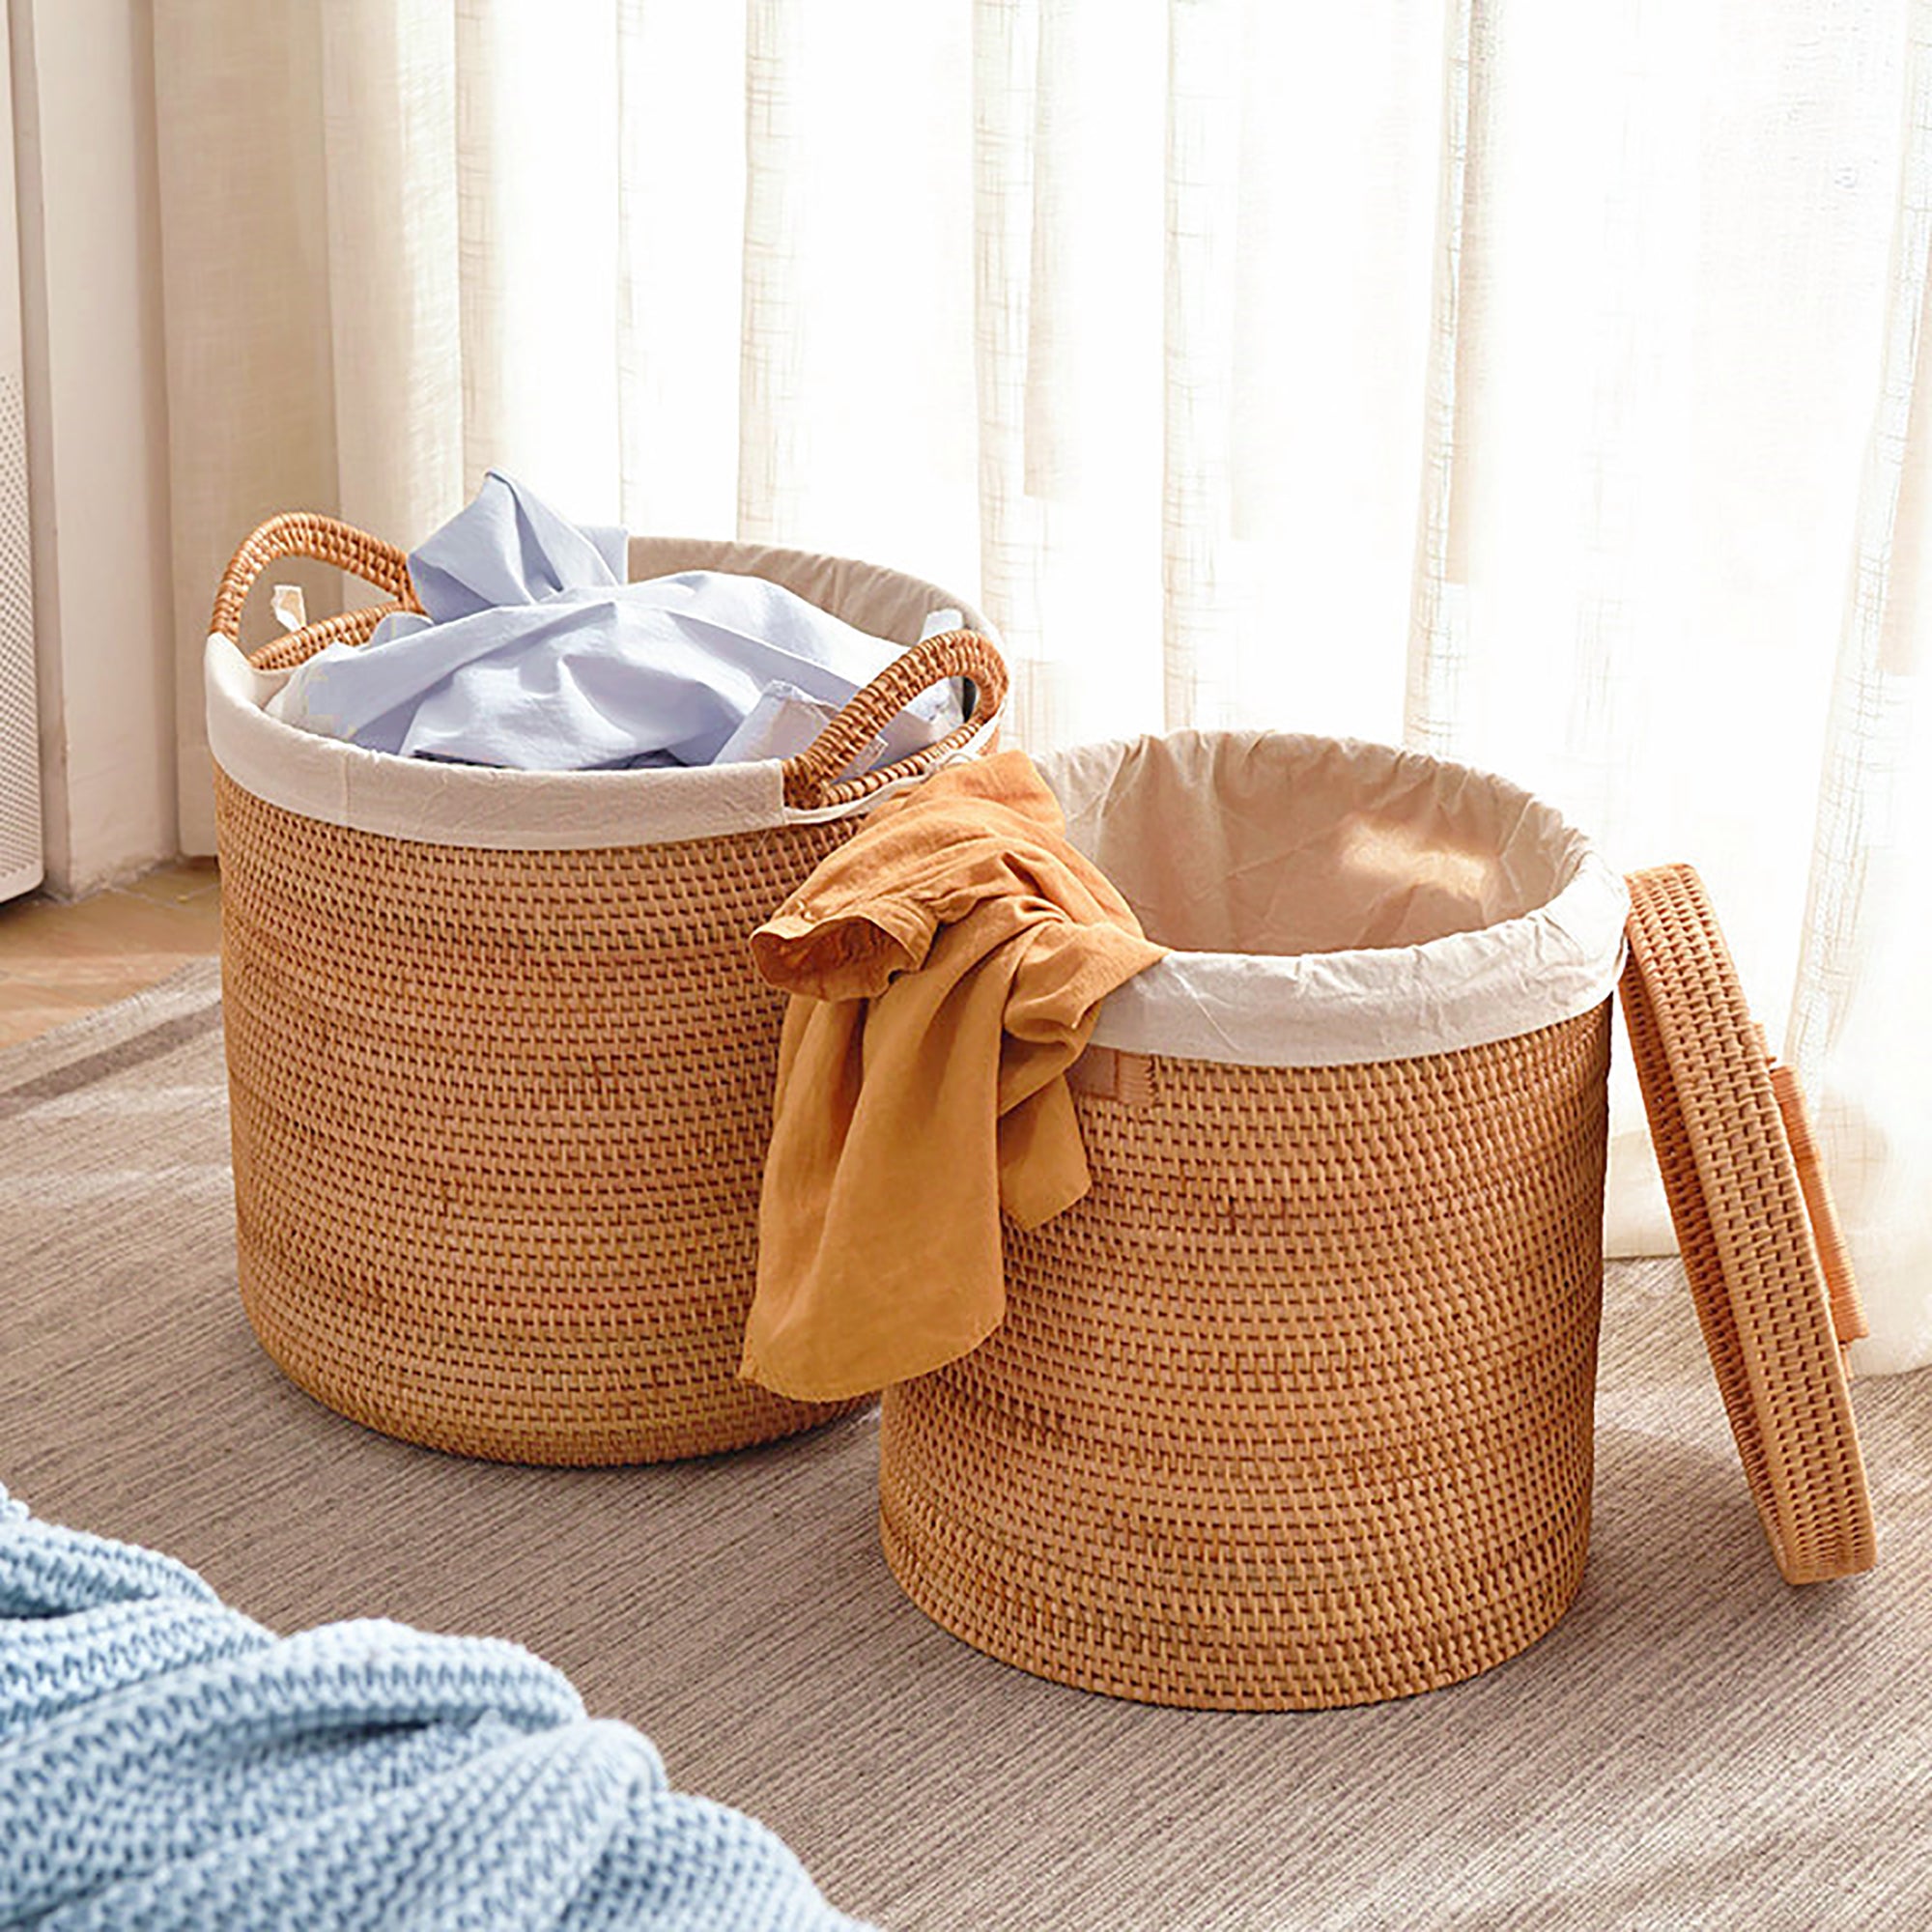 Solid Wood Rattan Woven Desktop Toy Clothing Storage Box,big Storage Basket  With Handle,dirty Laundry Basket,home Decor,housewarming Gift 